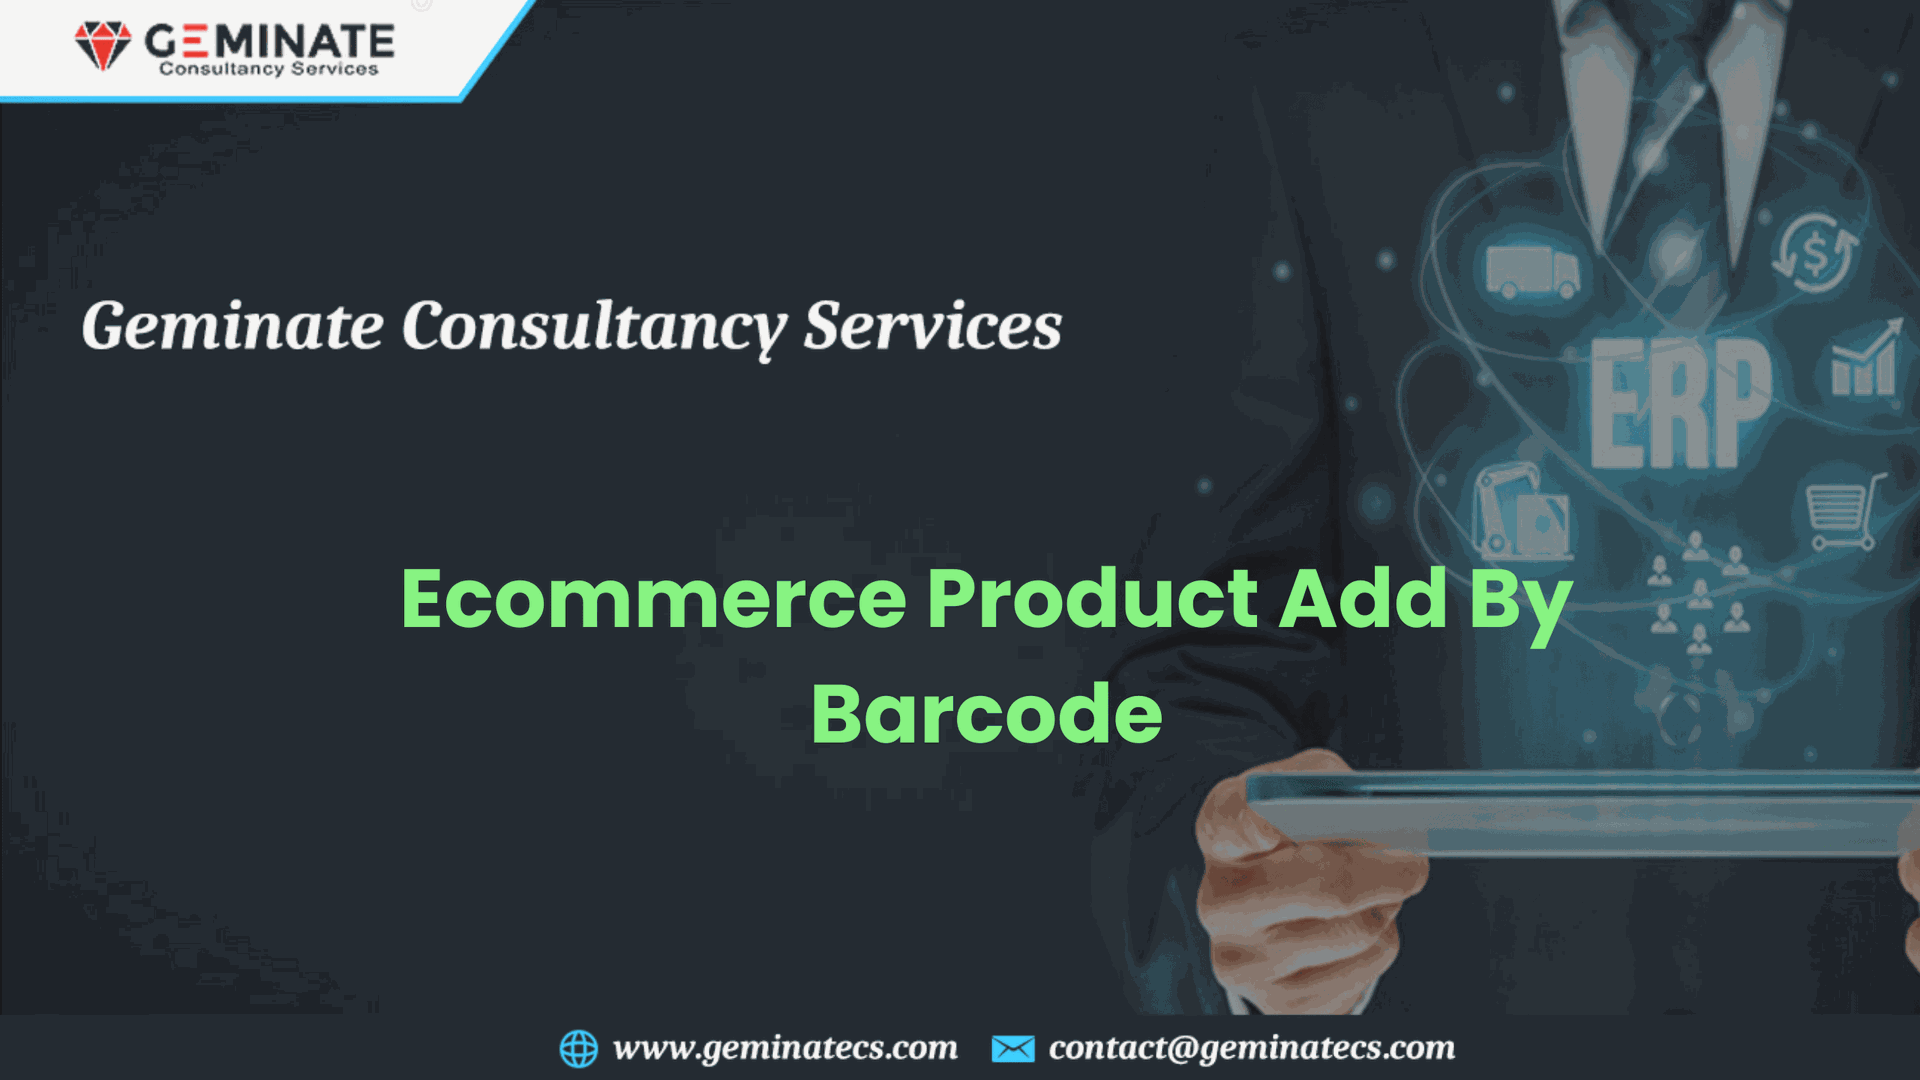 Ecommerce Product Add By Barcode